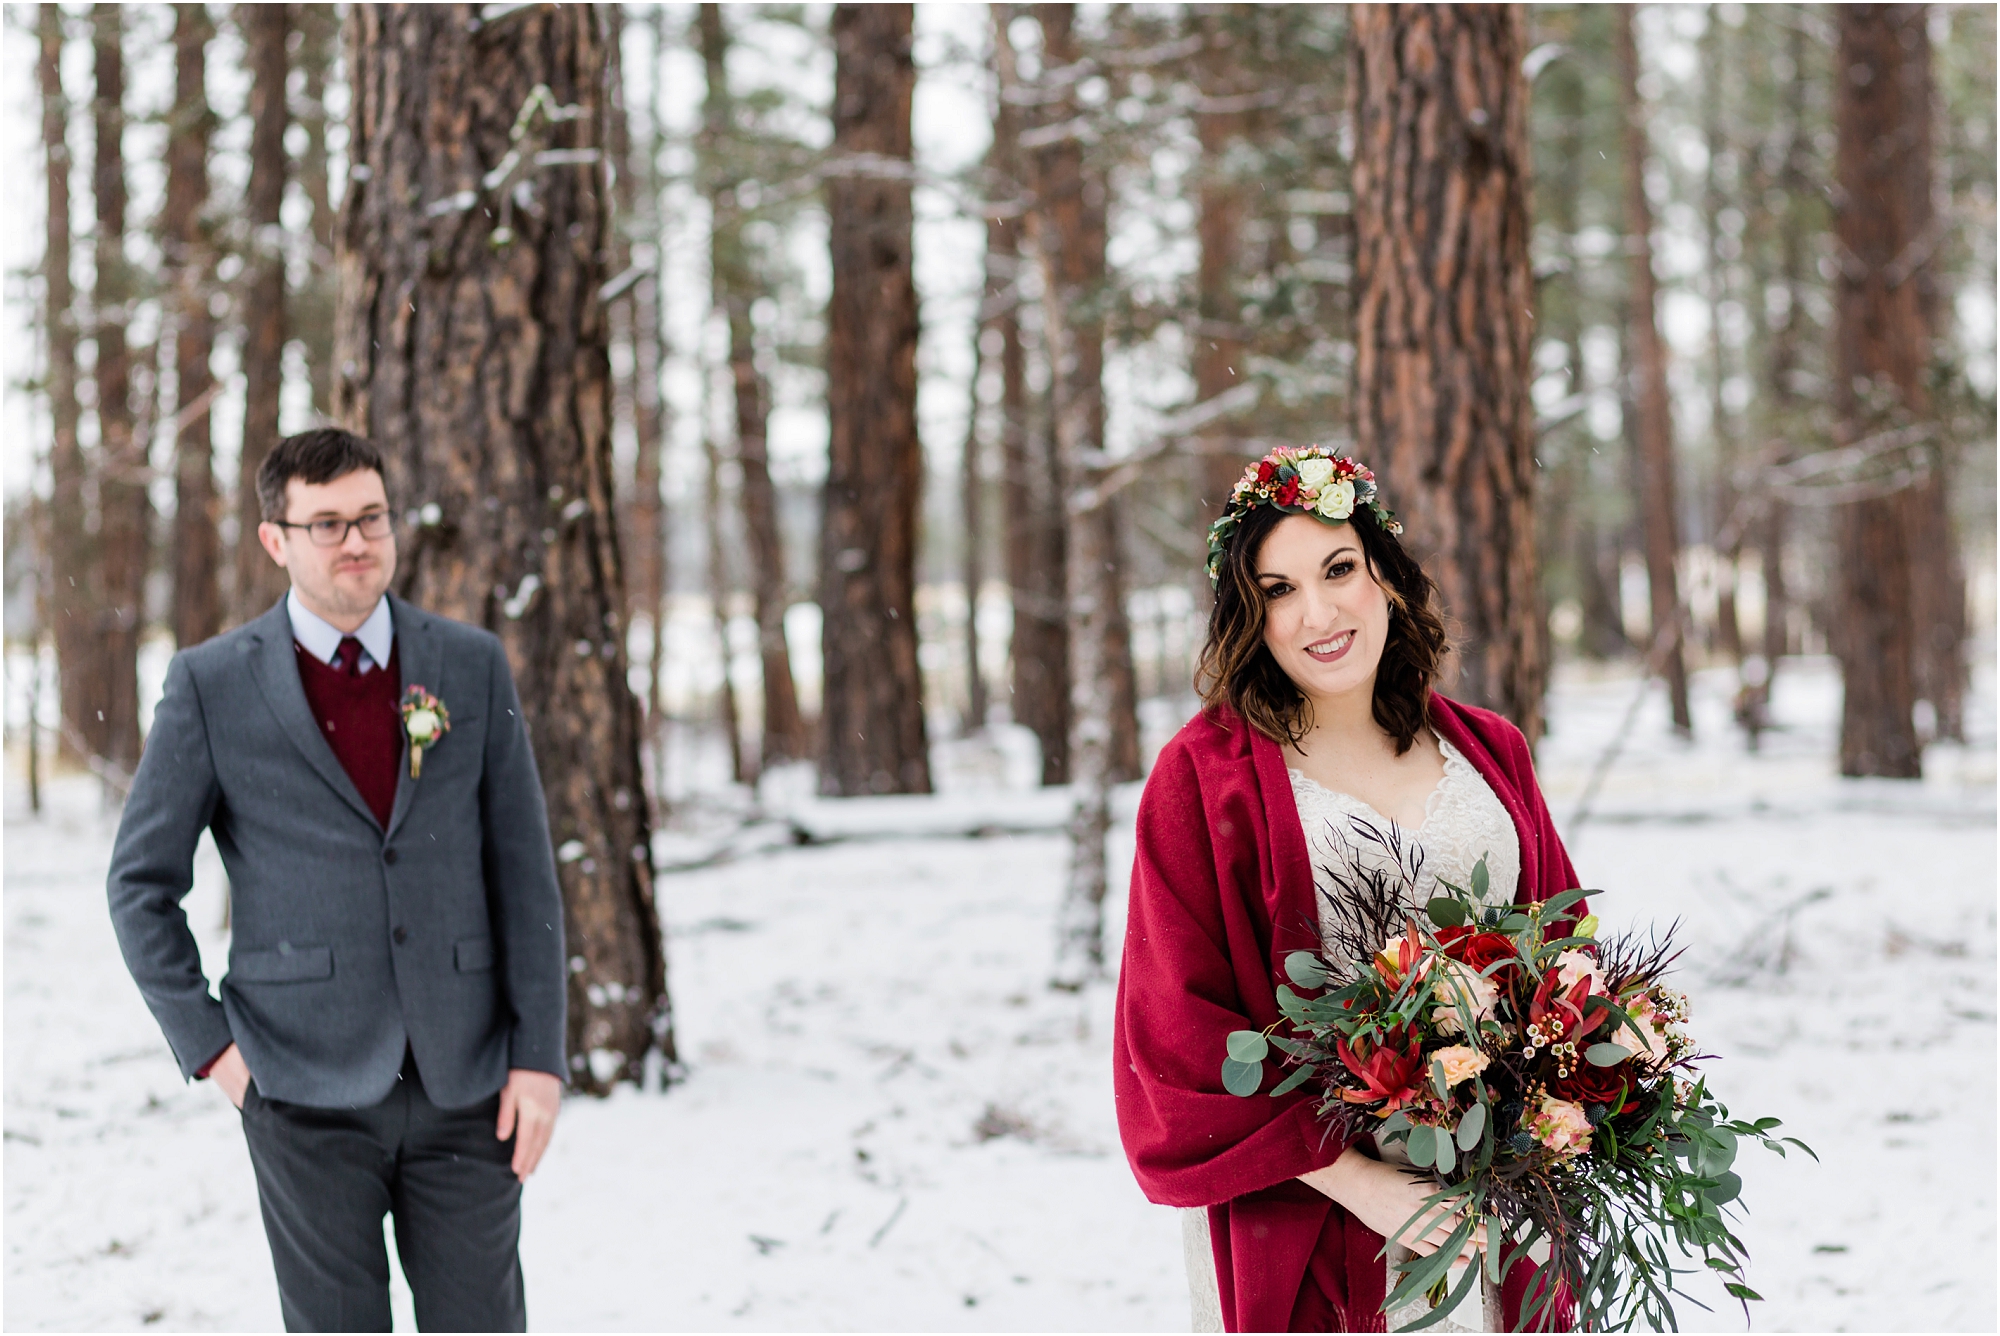 A bride, wrapped in a red shawl holding a gorgeous bouquet looks at the camera as her groom is slightly out of focus behind her in gray and burgundy, for their Central Oregon winter elopement at Five Pine Lodge in Sisters. | Erica Swantek Photography